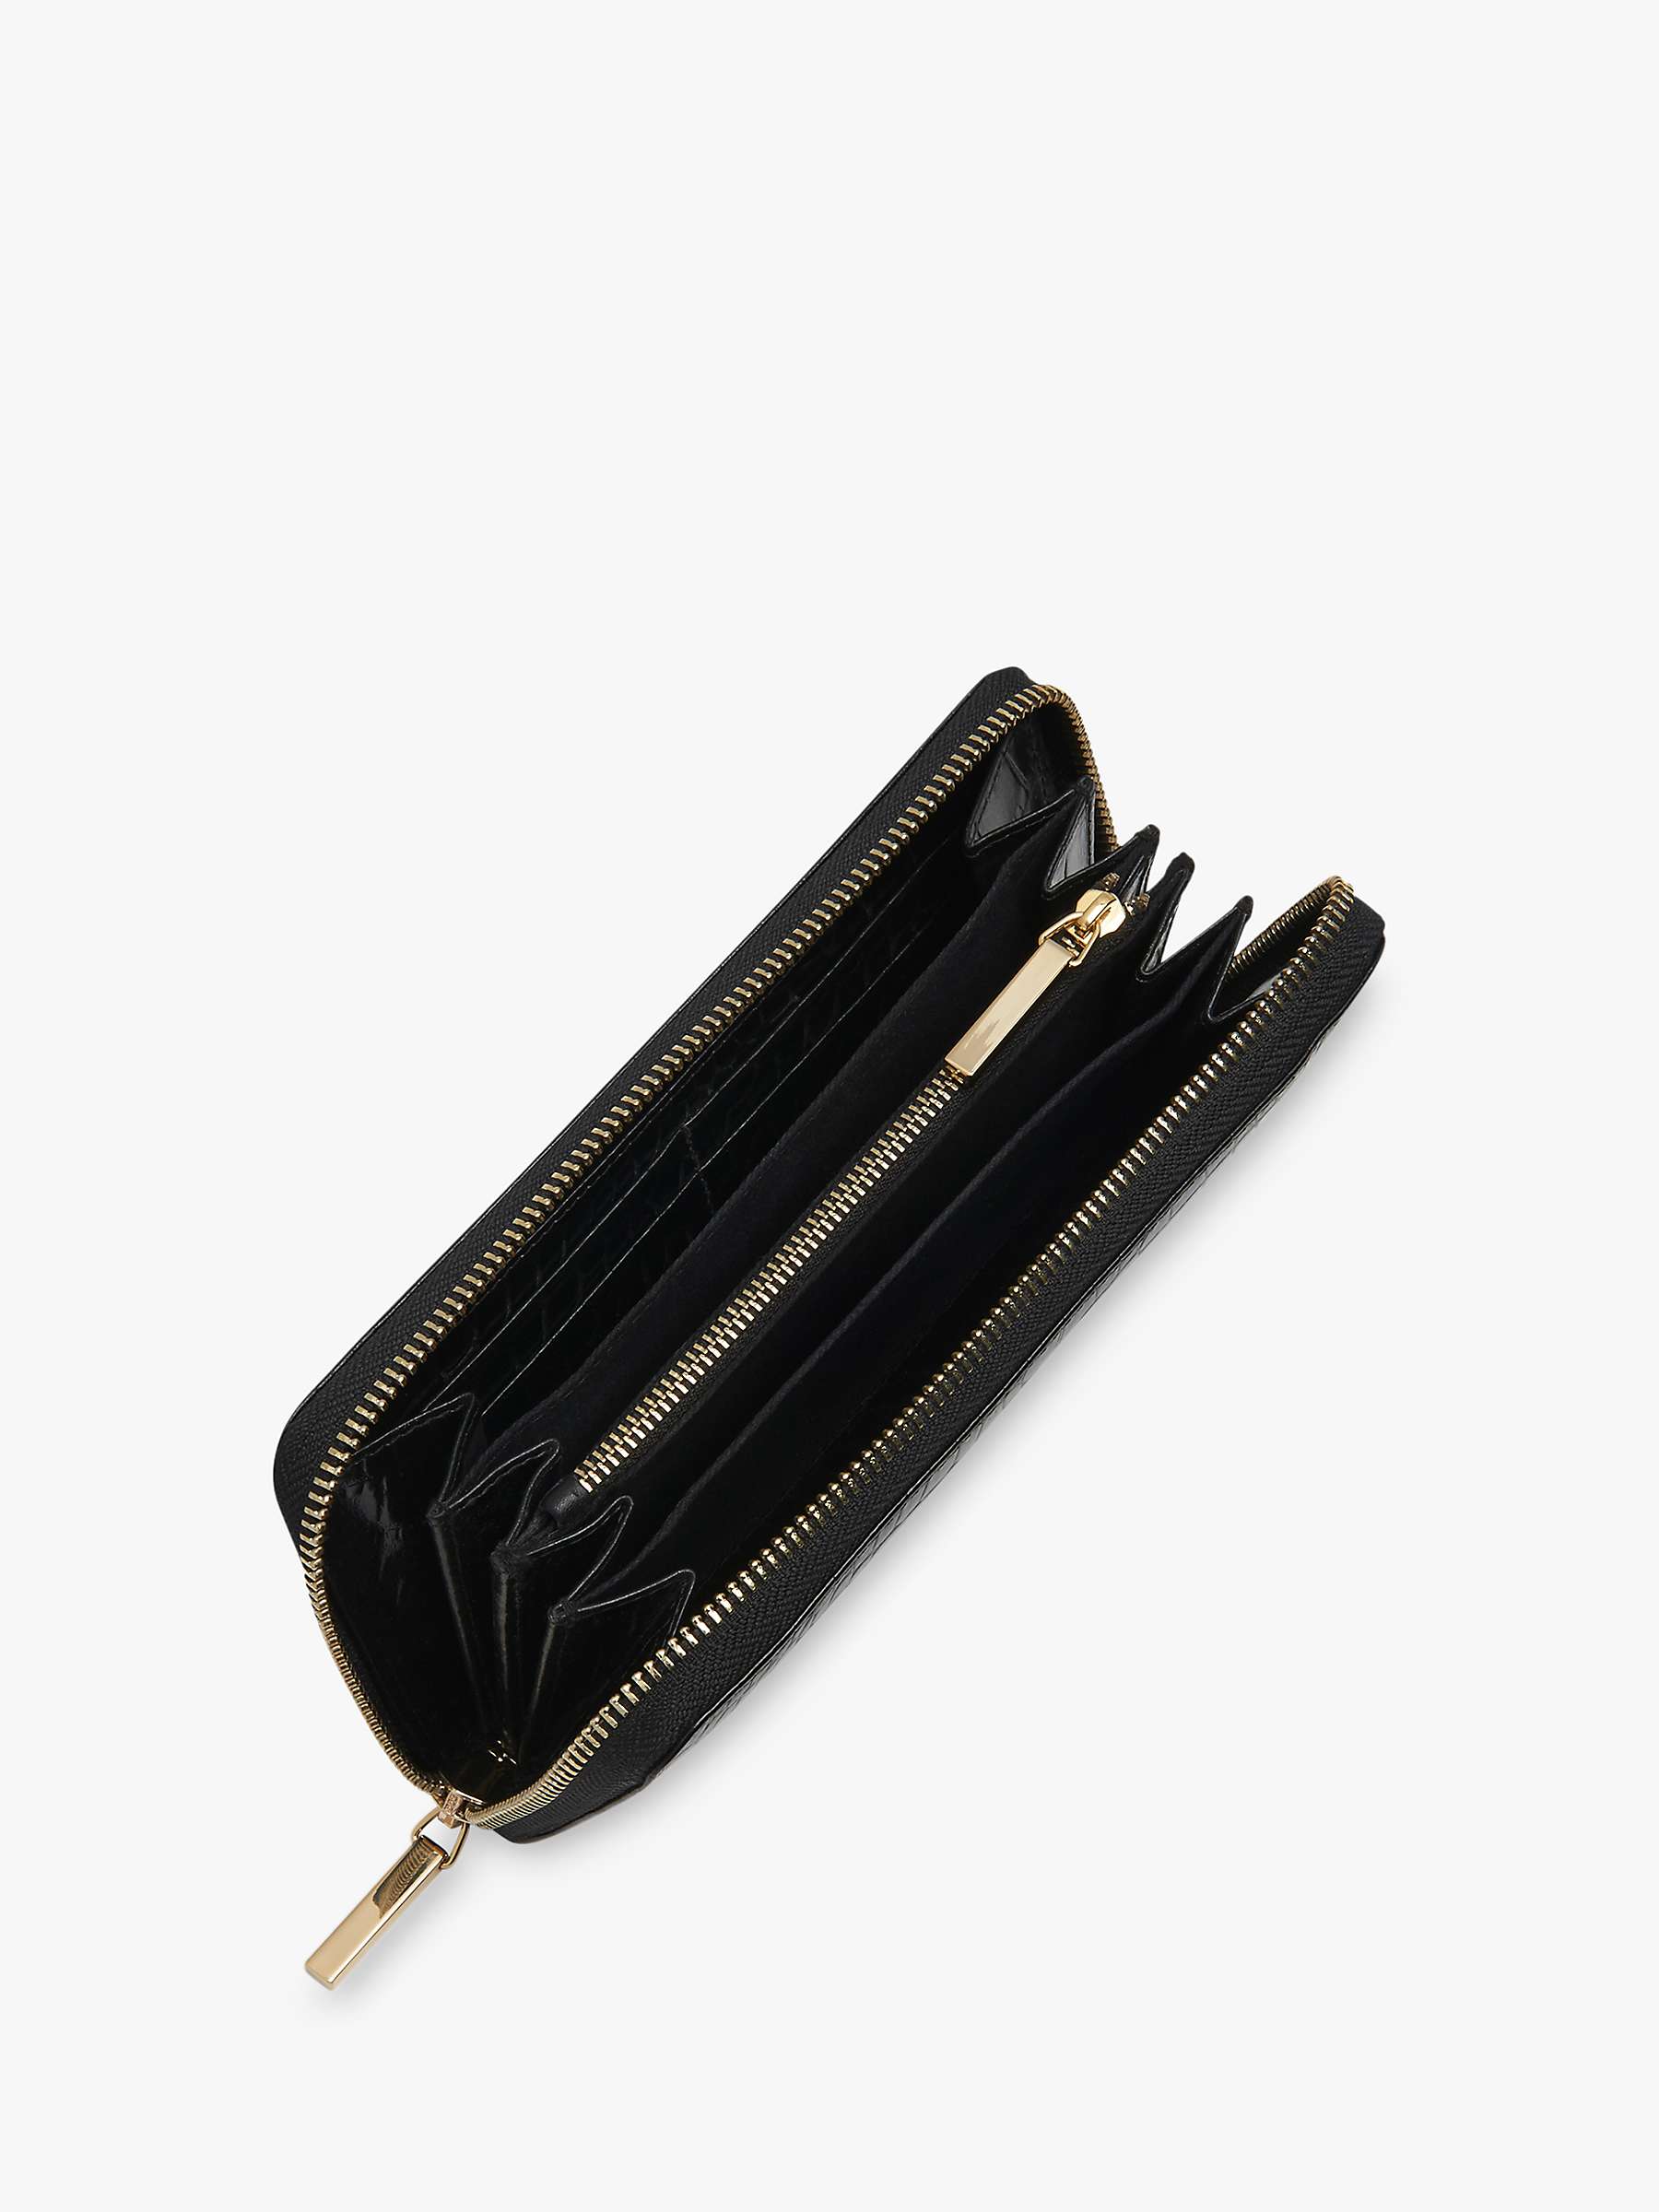 Buy Whistles Leather Shiny Croc Long Purse, Black Online at johnlewis.com